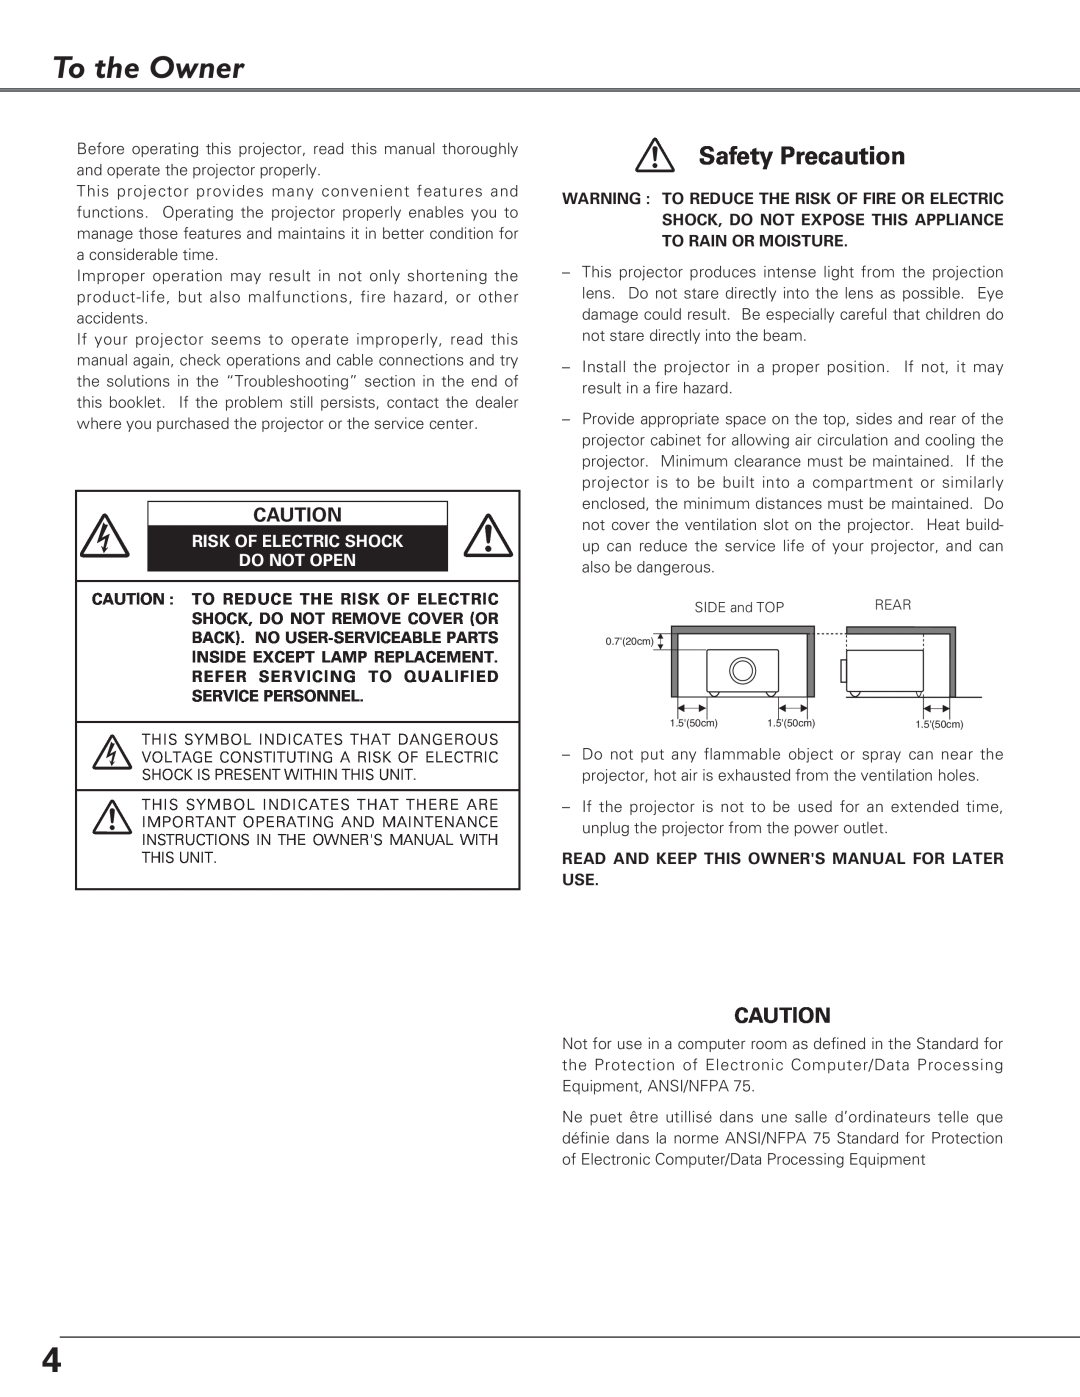 Sanyo PLC-XU51, PLC-XU58, PLC-SU51 owner manual To the Owner, Safety Precaution, Risk Of Electric Shock Do Not Open 